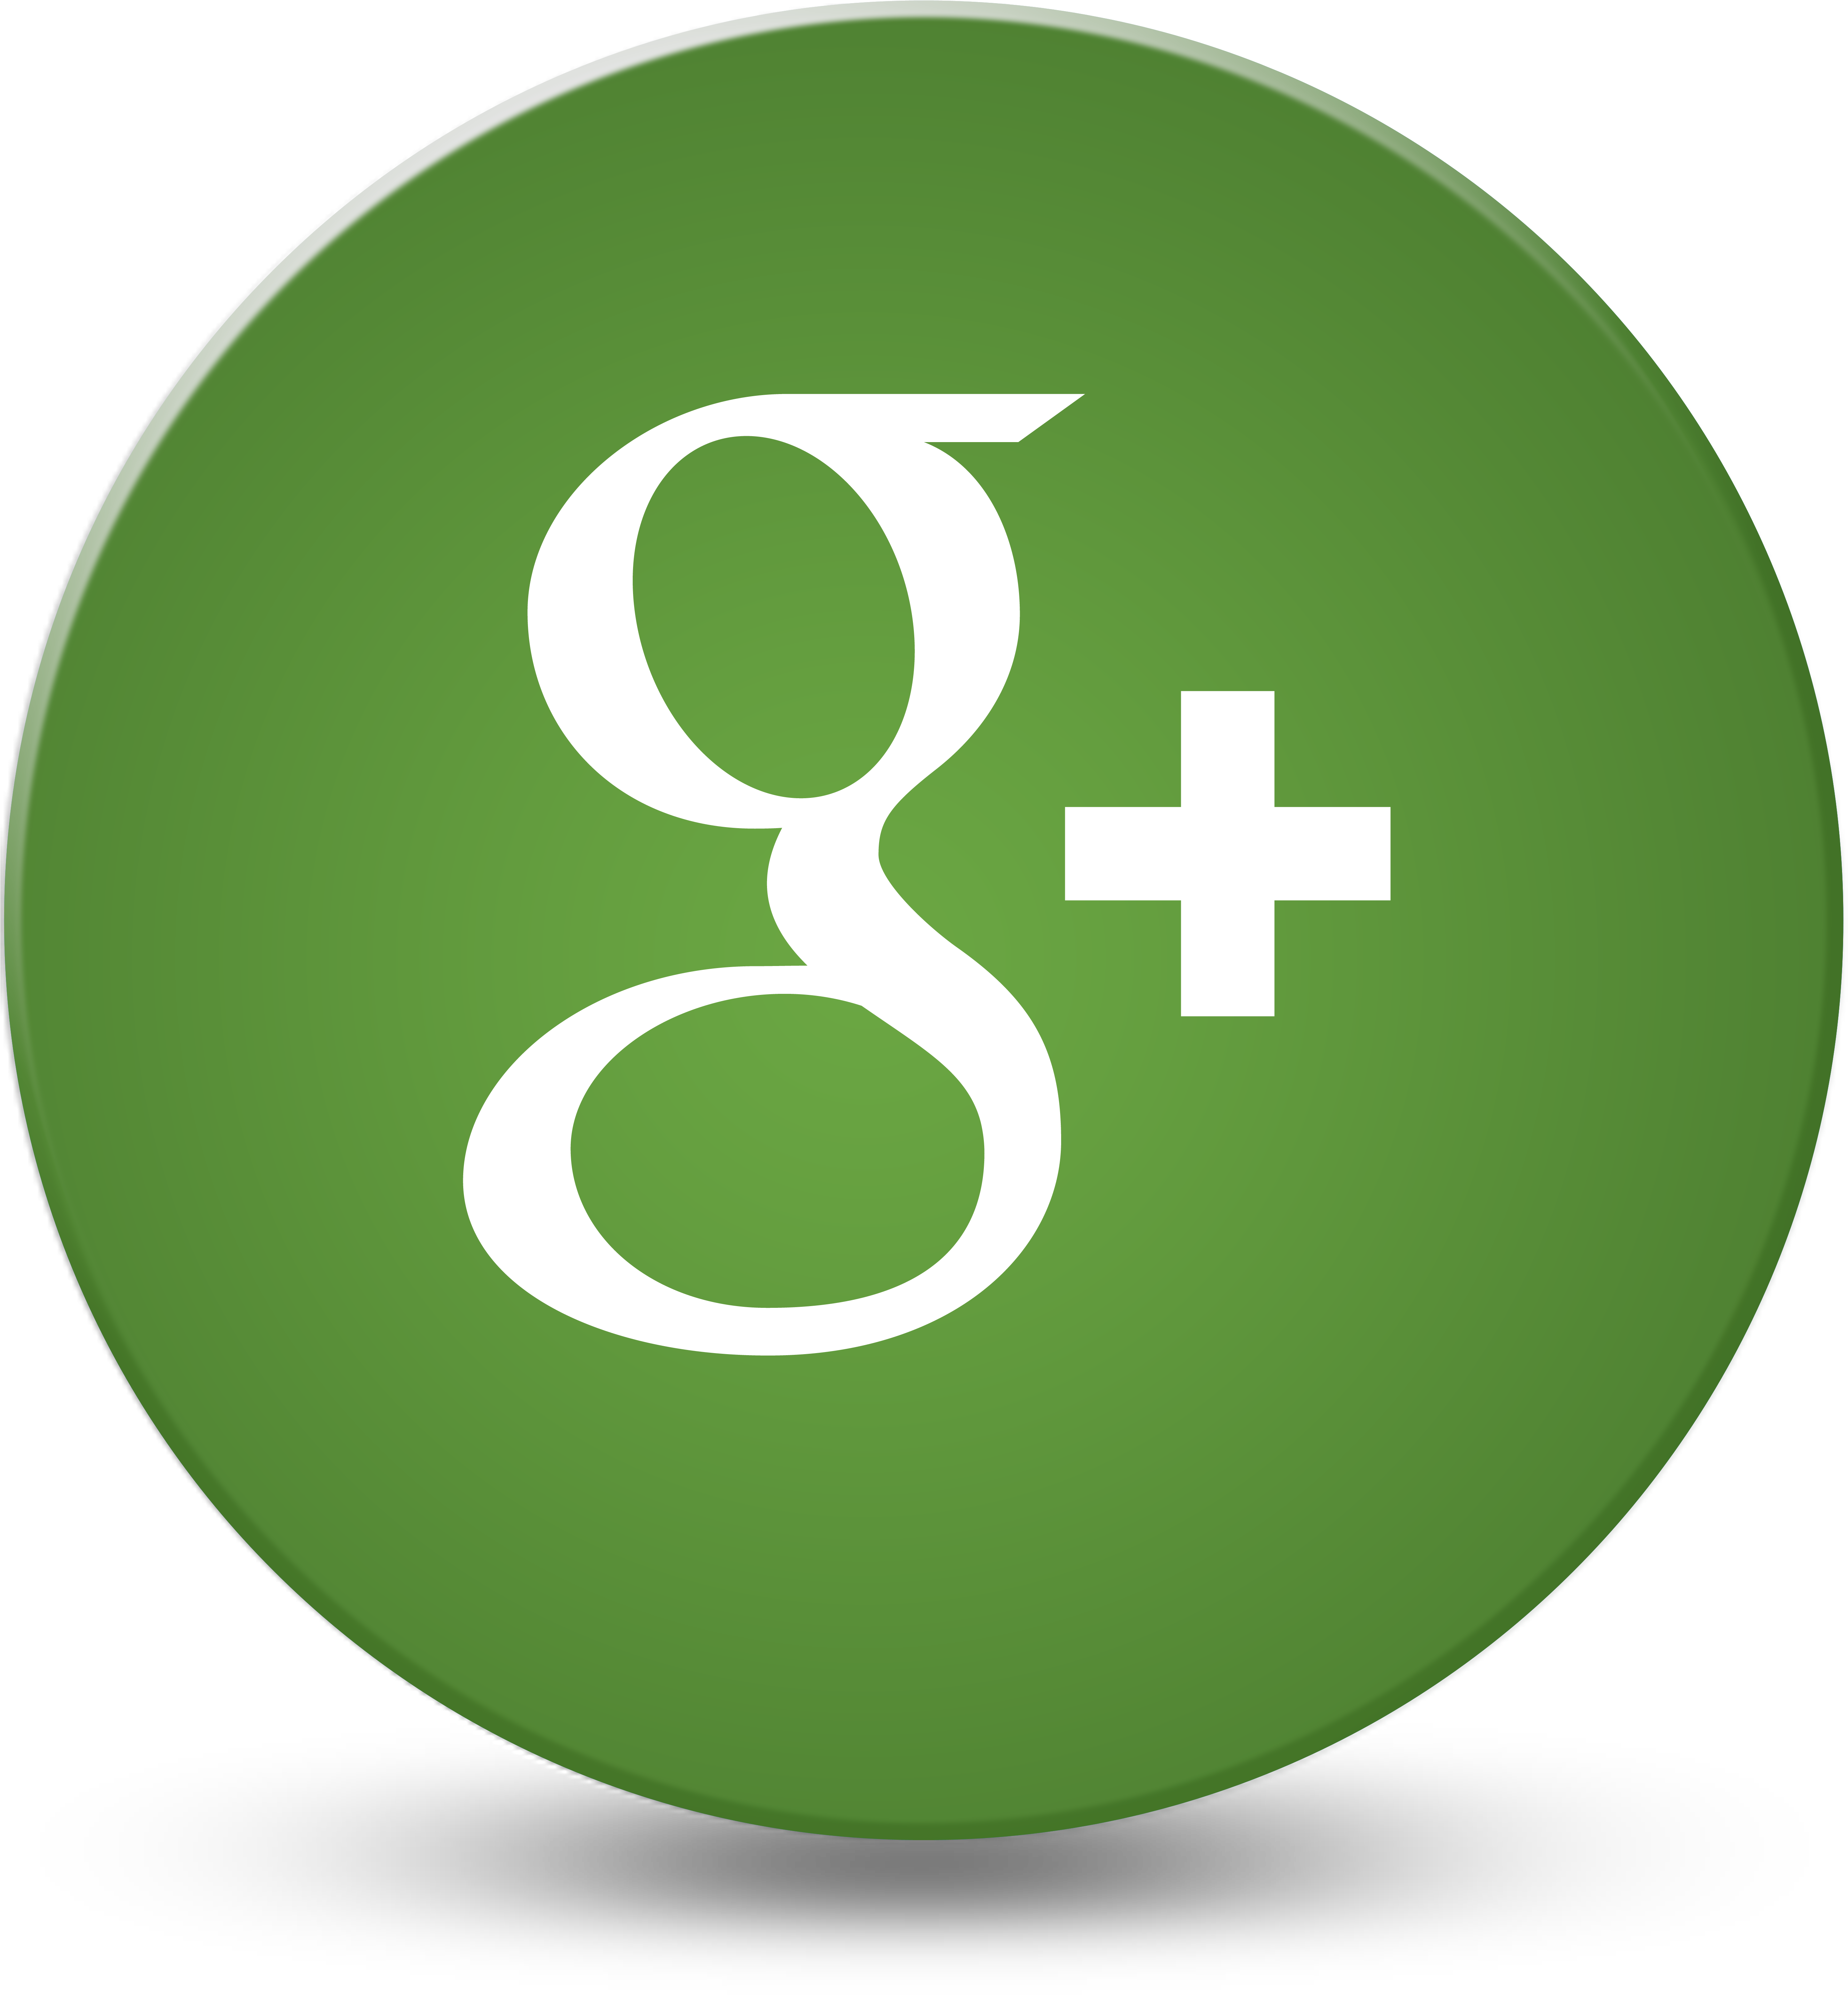 The Best Way To Predict The Future Is To Create It - Google Plus Logo Green (5800x5800)